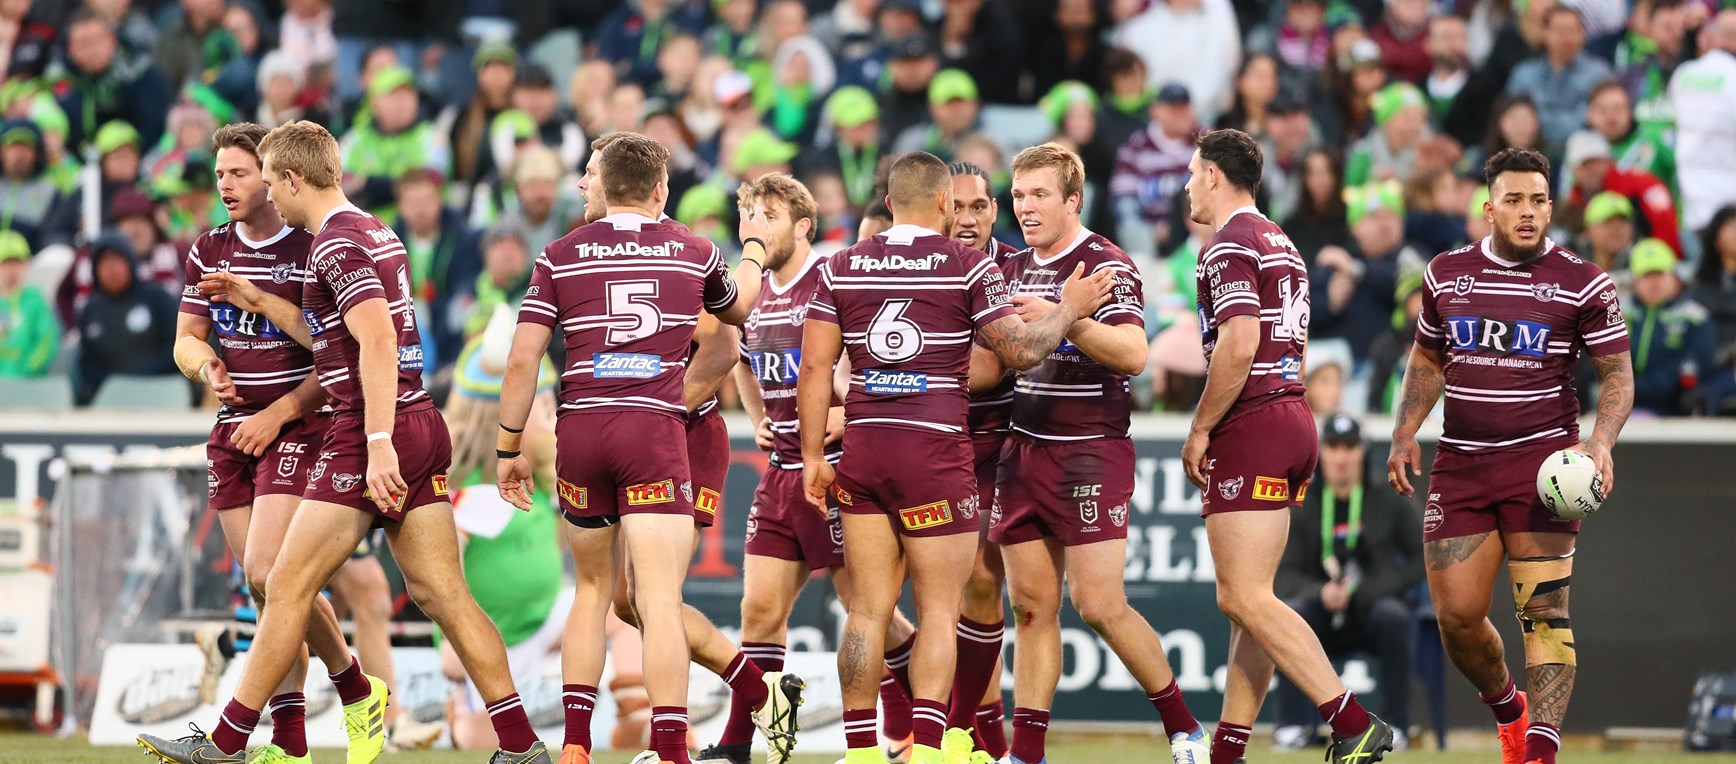 Gallery | Our thrilling win over Canberra